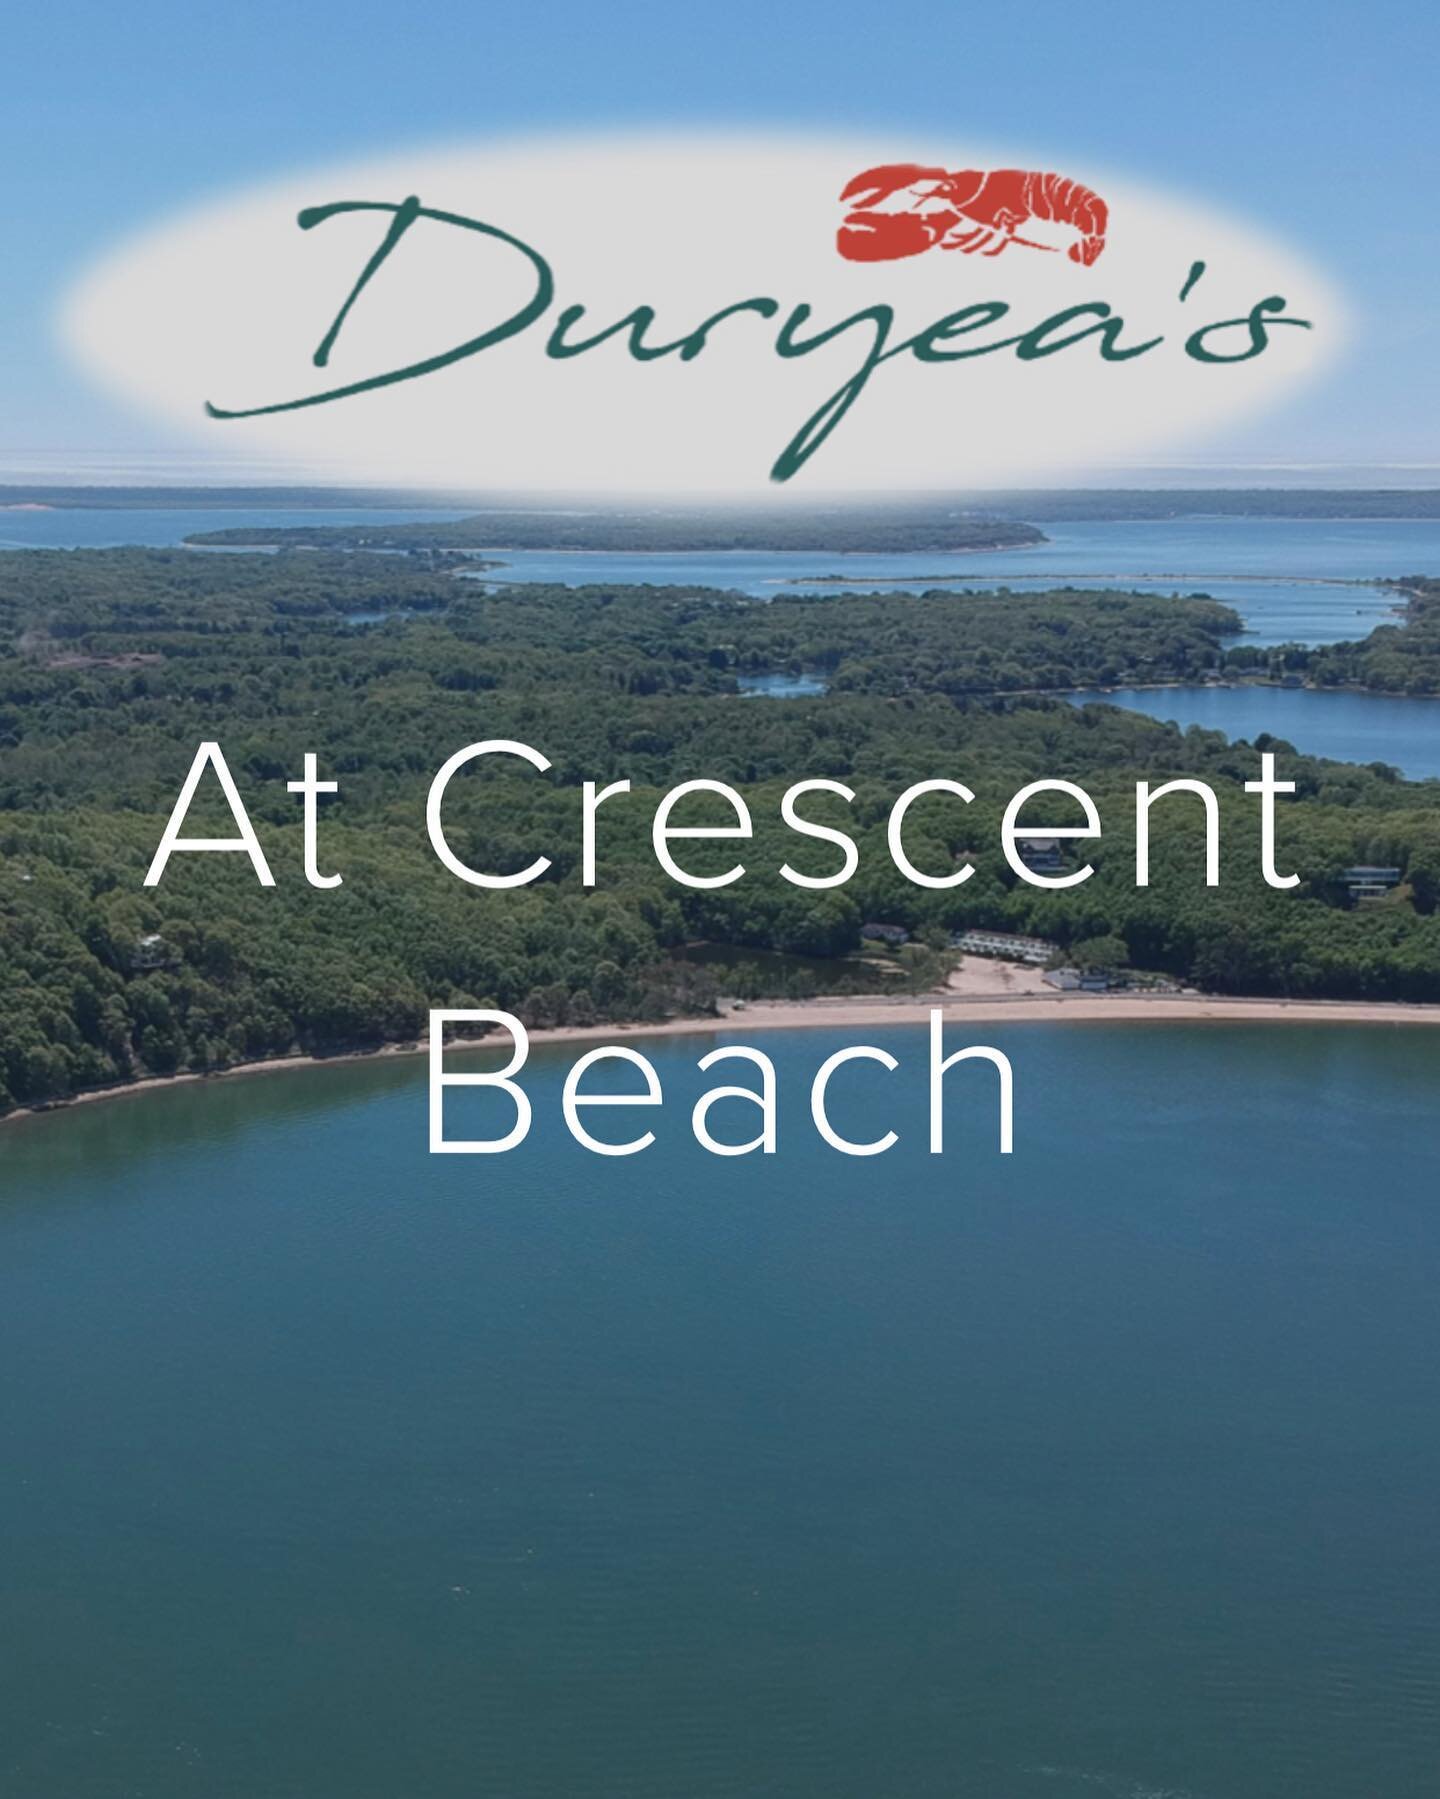 Now delivering from @duryeaslobsterdeck to the anchorage at Crescent Beach, Shelter Island. Order now at RideShore.com/Duryeas